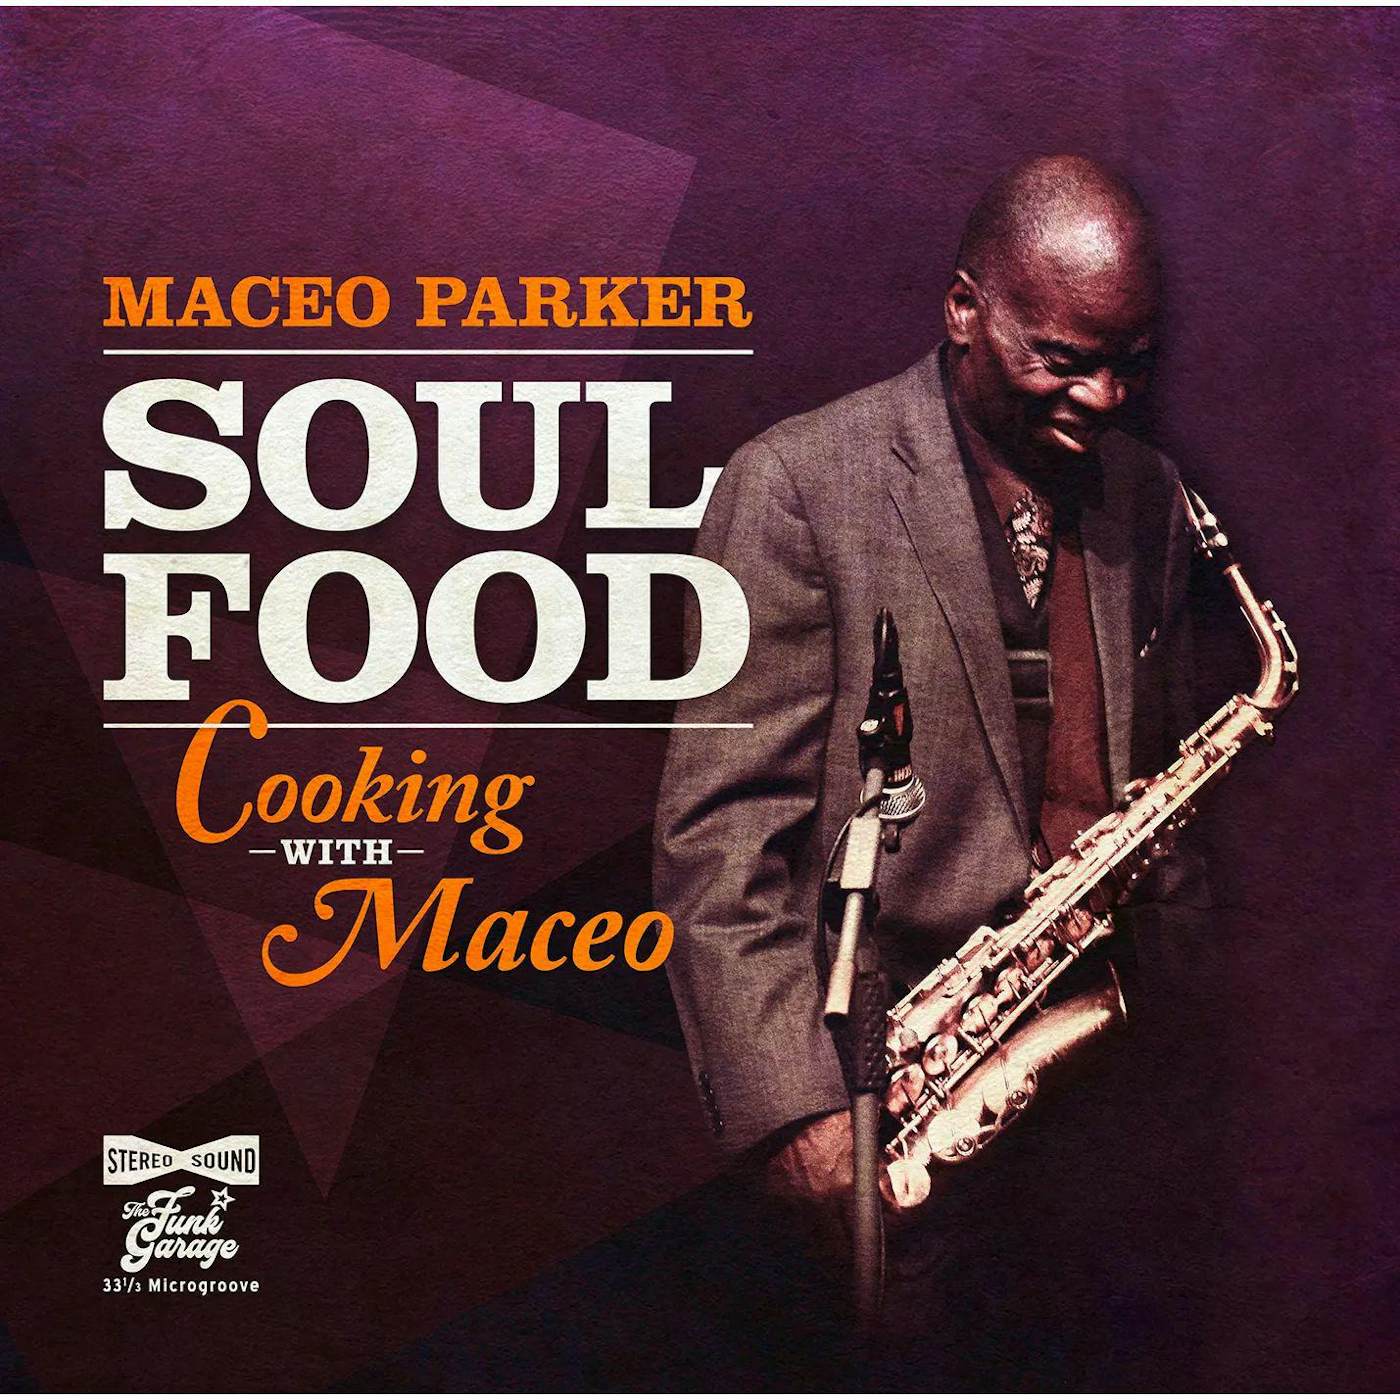 Maceo Parker Soul Food - Cooking With Maceo (140g/Purple) Vinyl Record